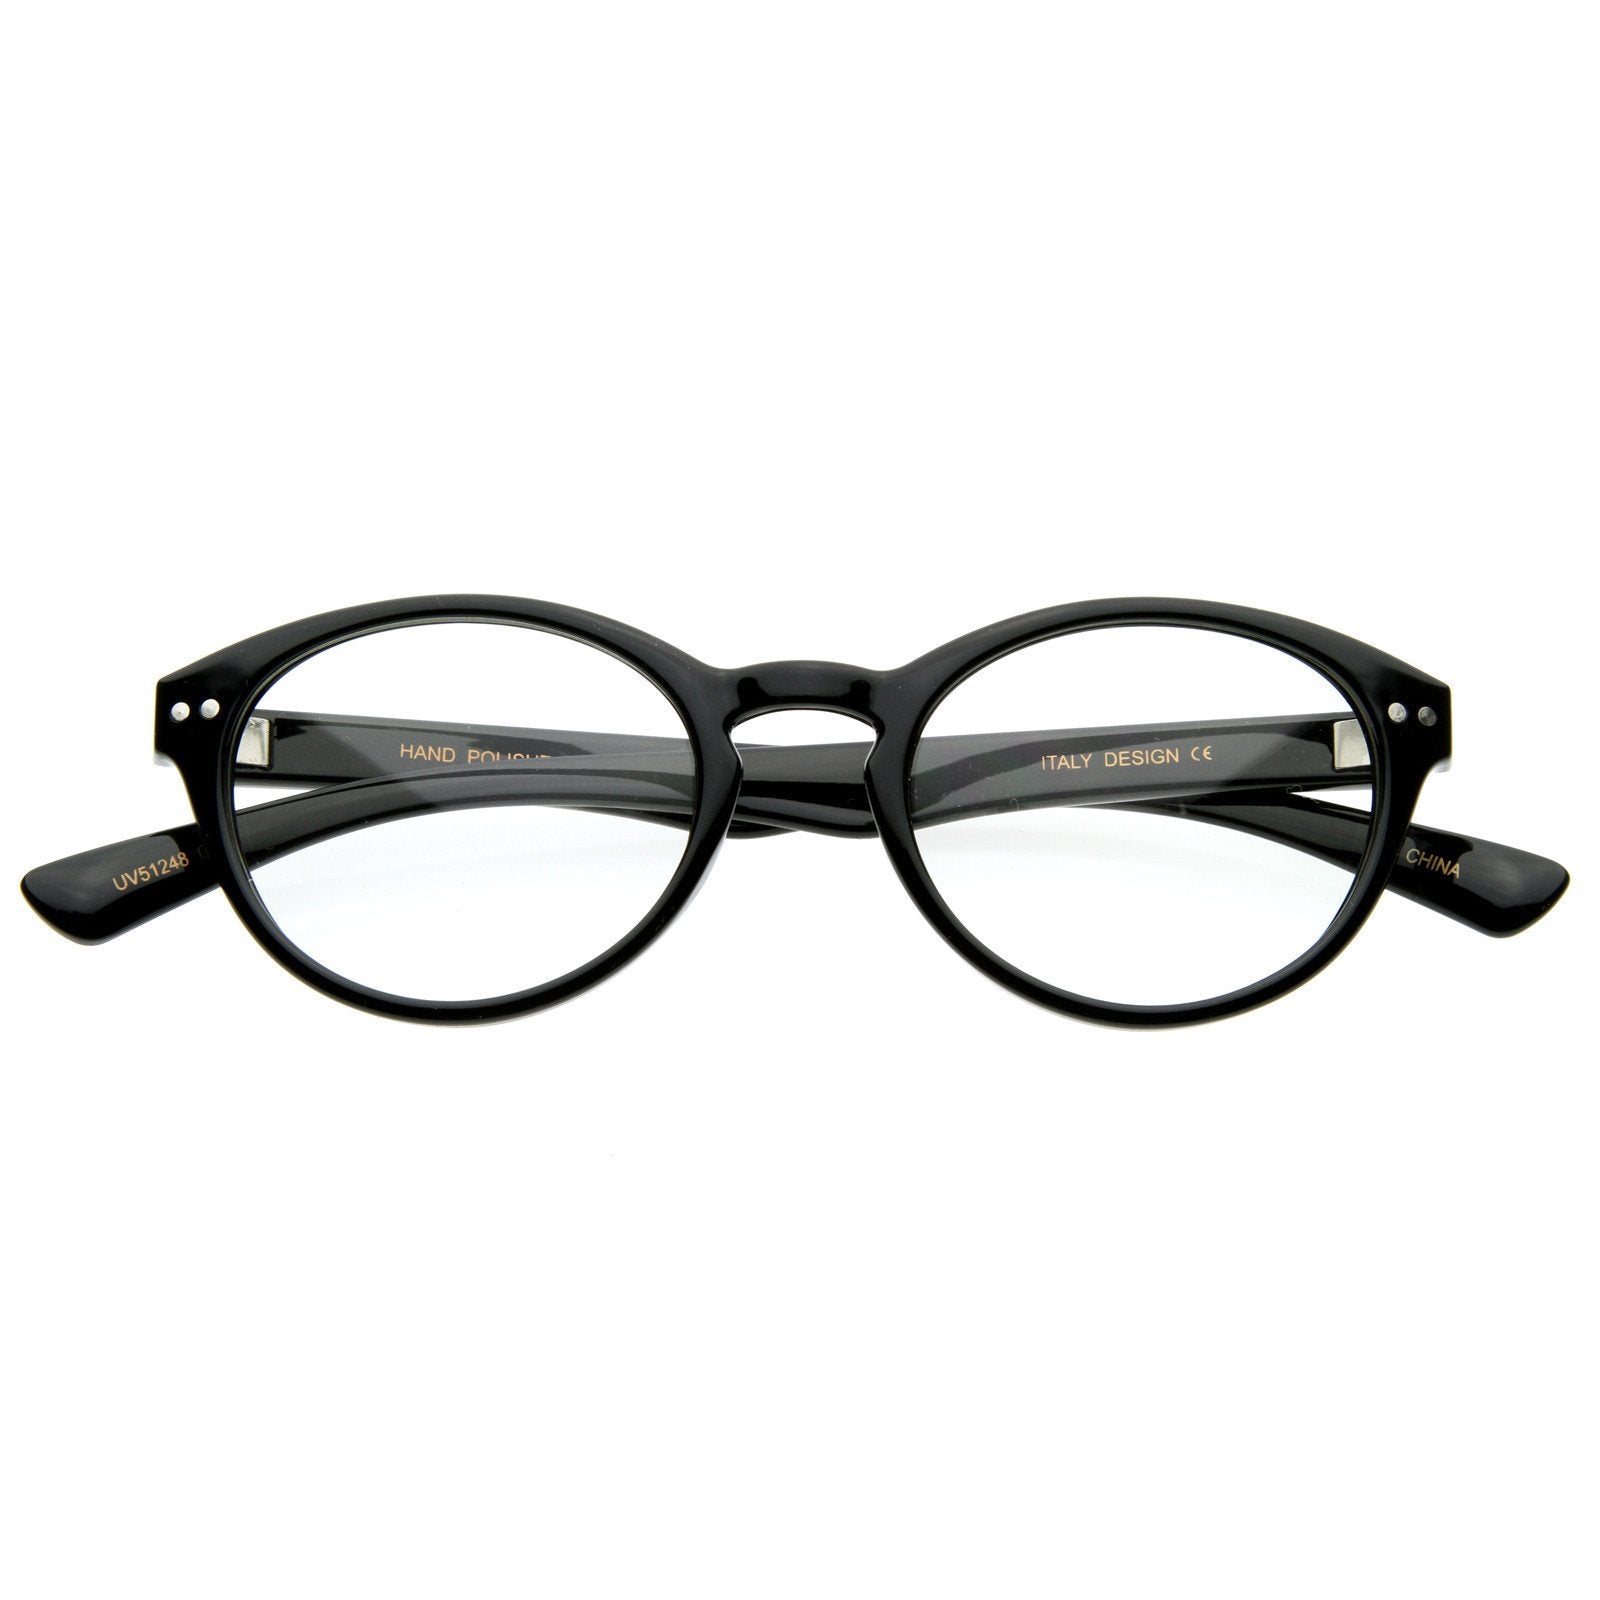 Dapper Optical Rx Quality Oval Clear Lens Glasses Zerouv 